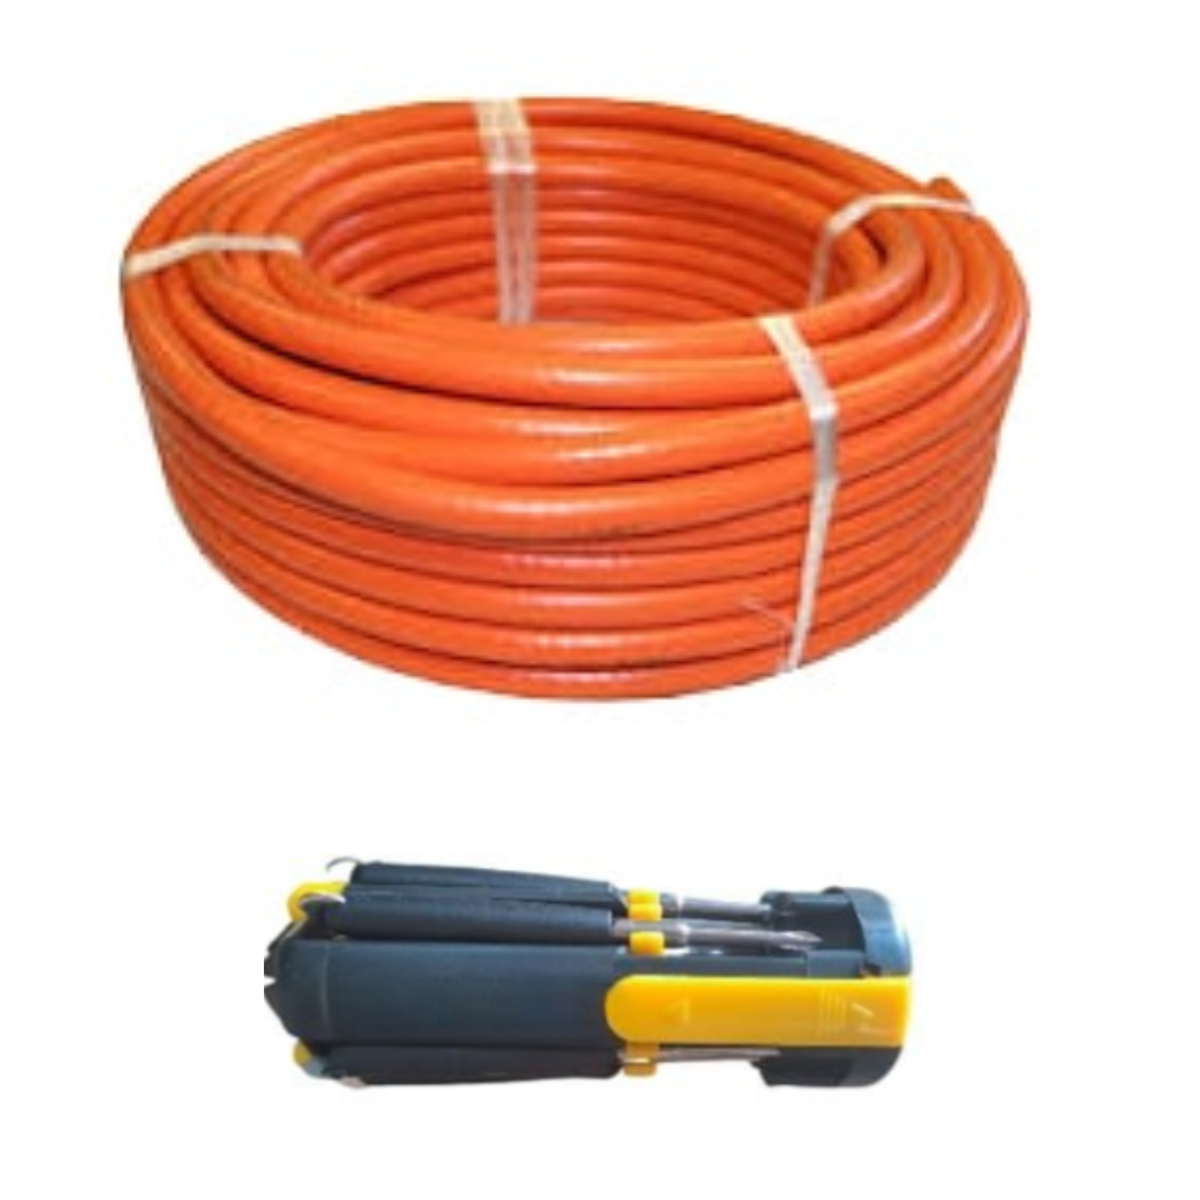 Gas Hose LPG 8mm x 30m SABS Approved With Screwdriver Set